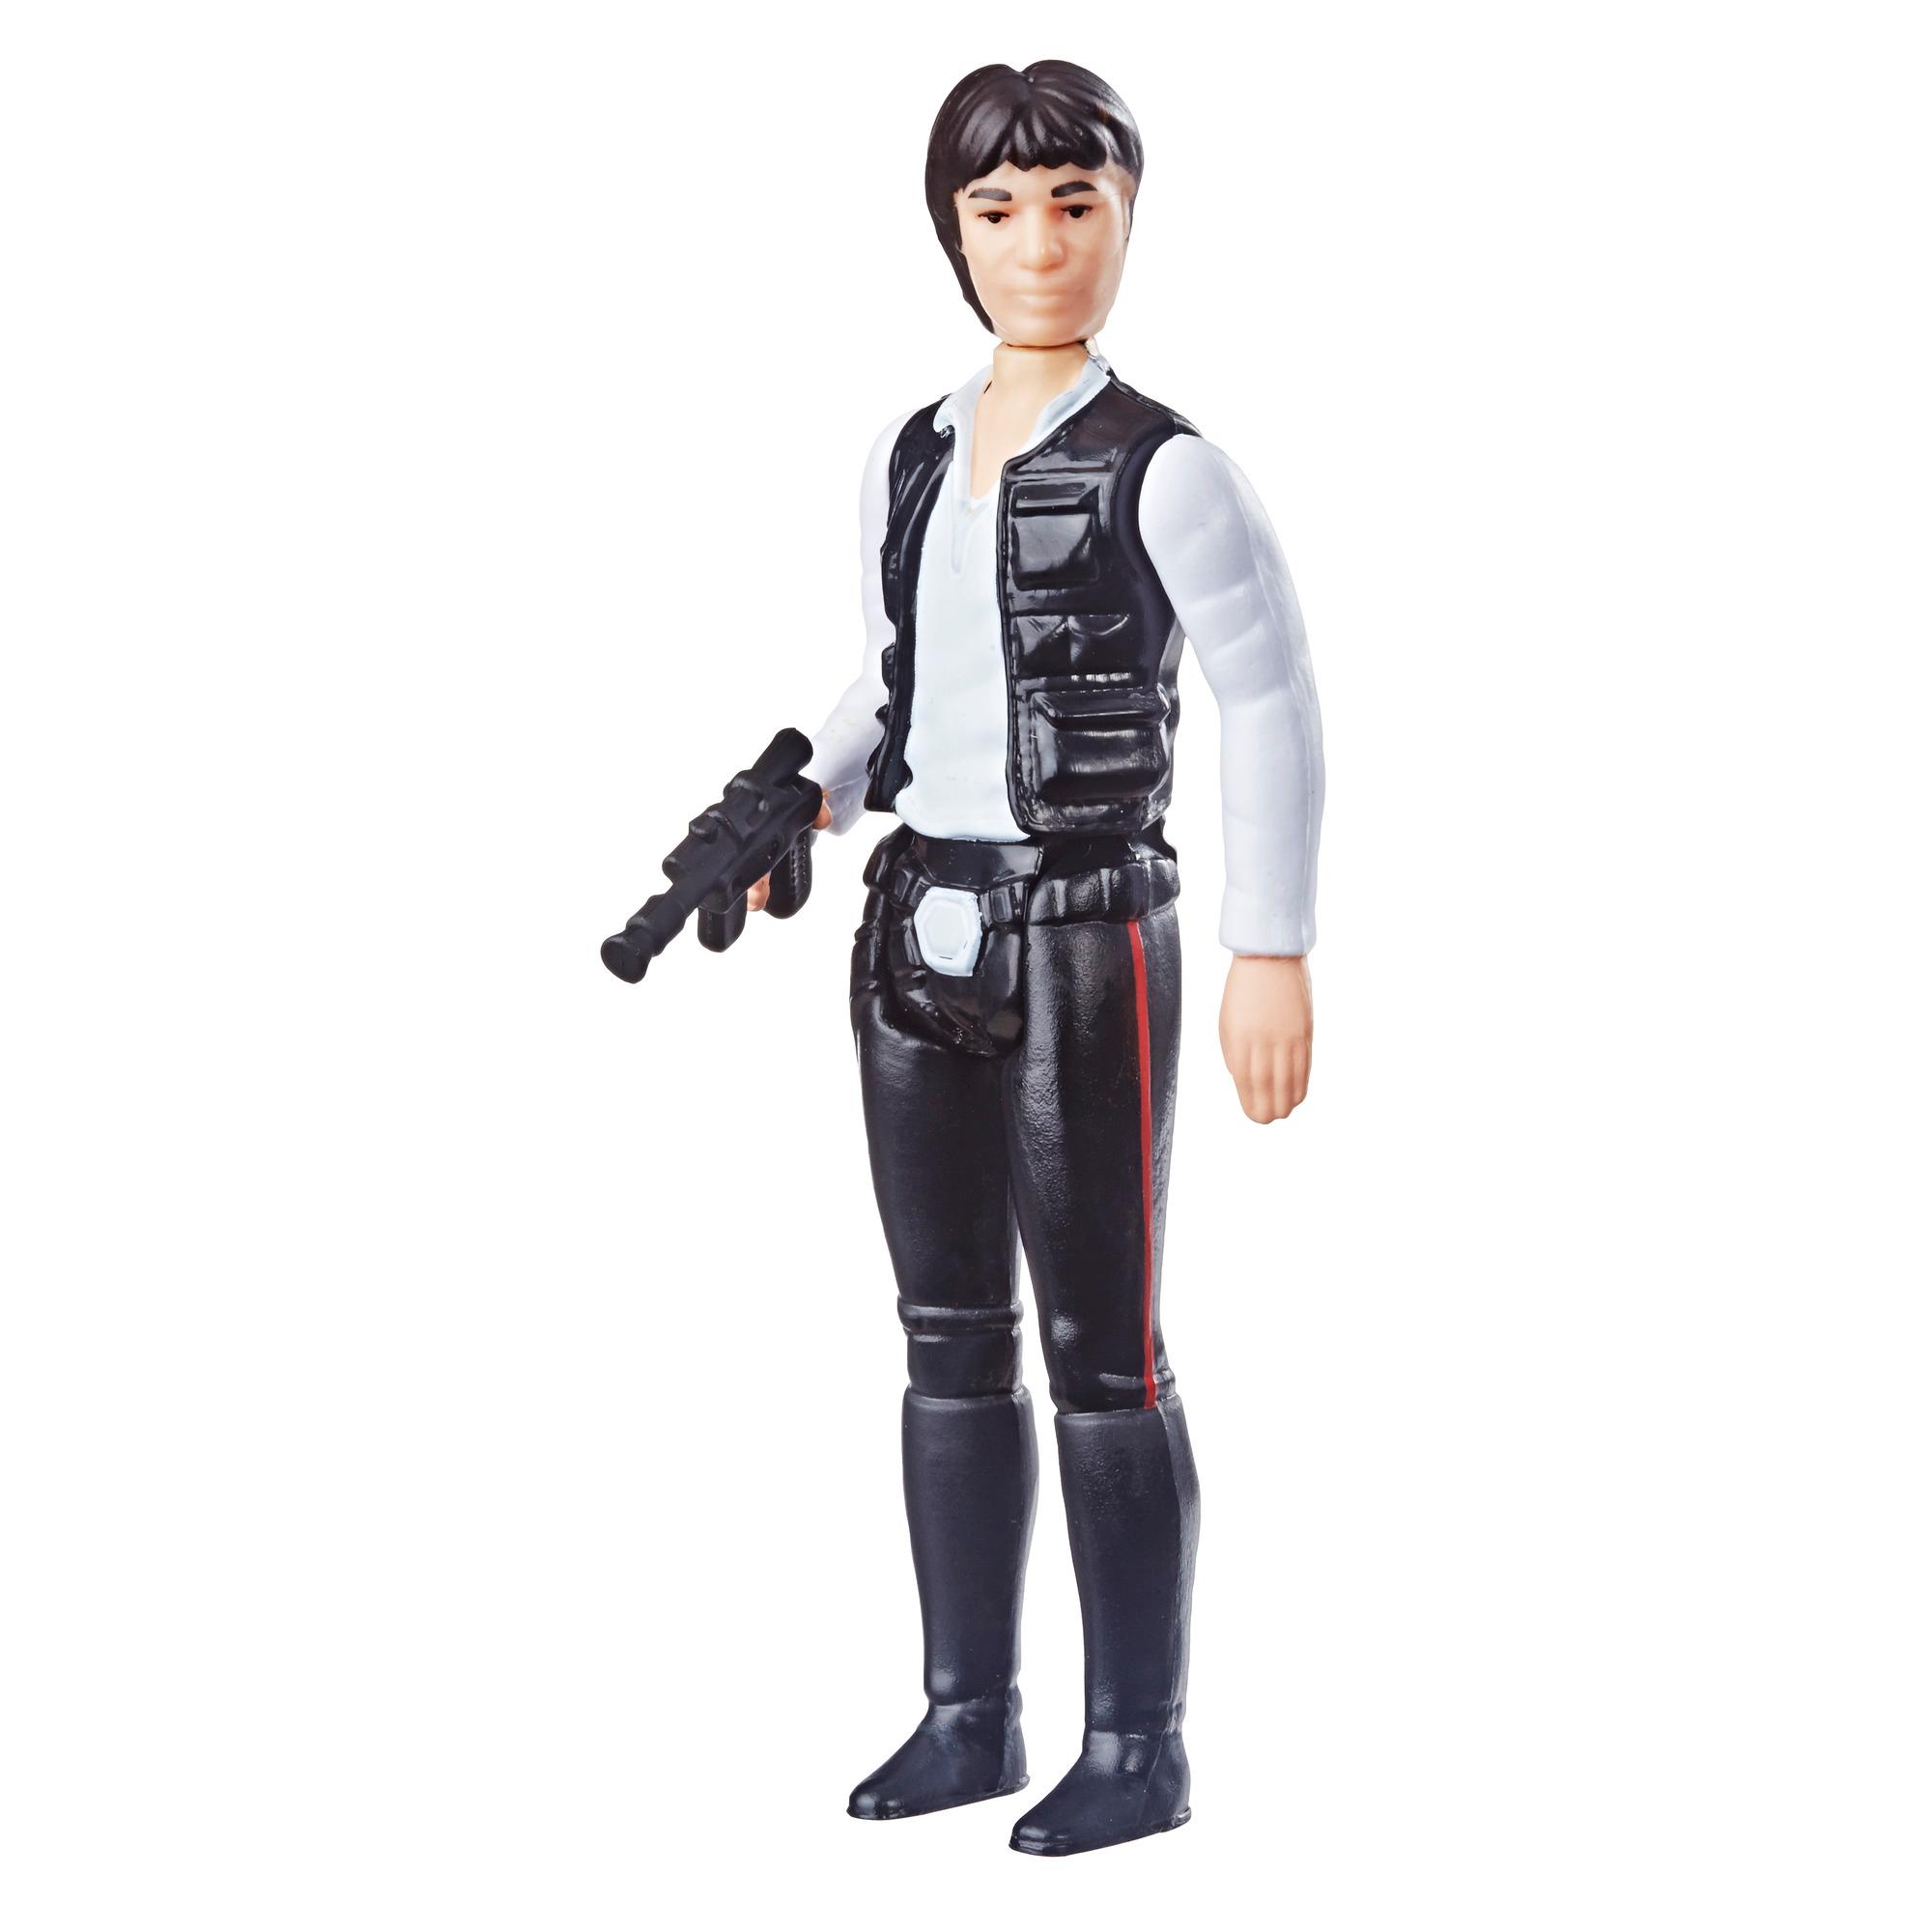 Star Wars Retro Collection Episode IV: A New Hope Han Solo 3.75-Inch-Scale Action Figure Toy – Inspired by Classic 1970s-Sculpt and Packaging Collectible Star Wars Figure